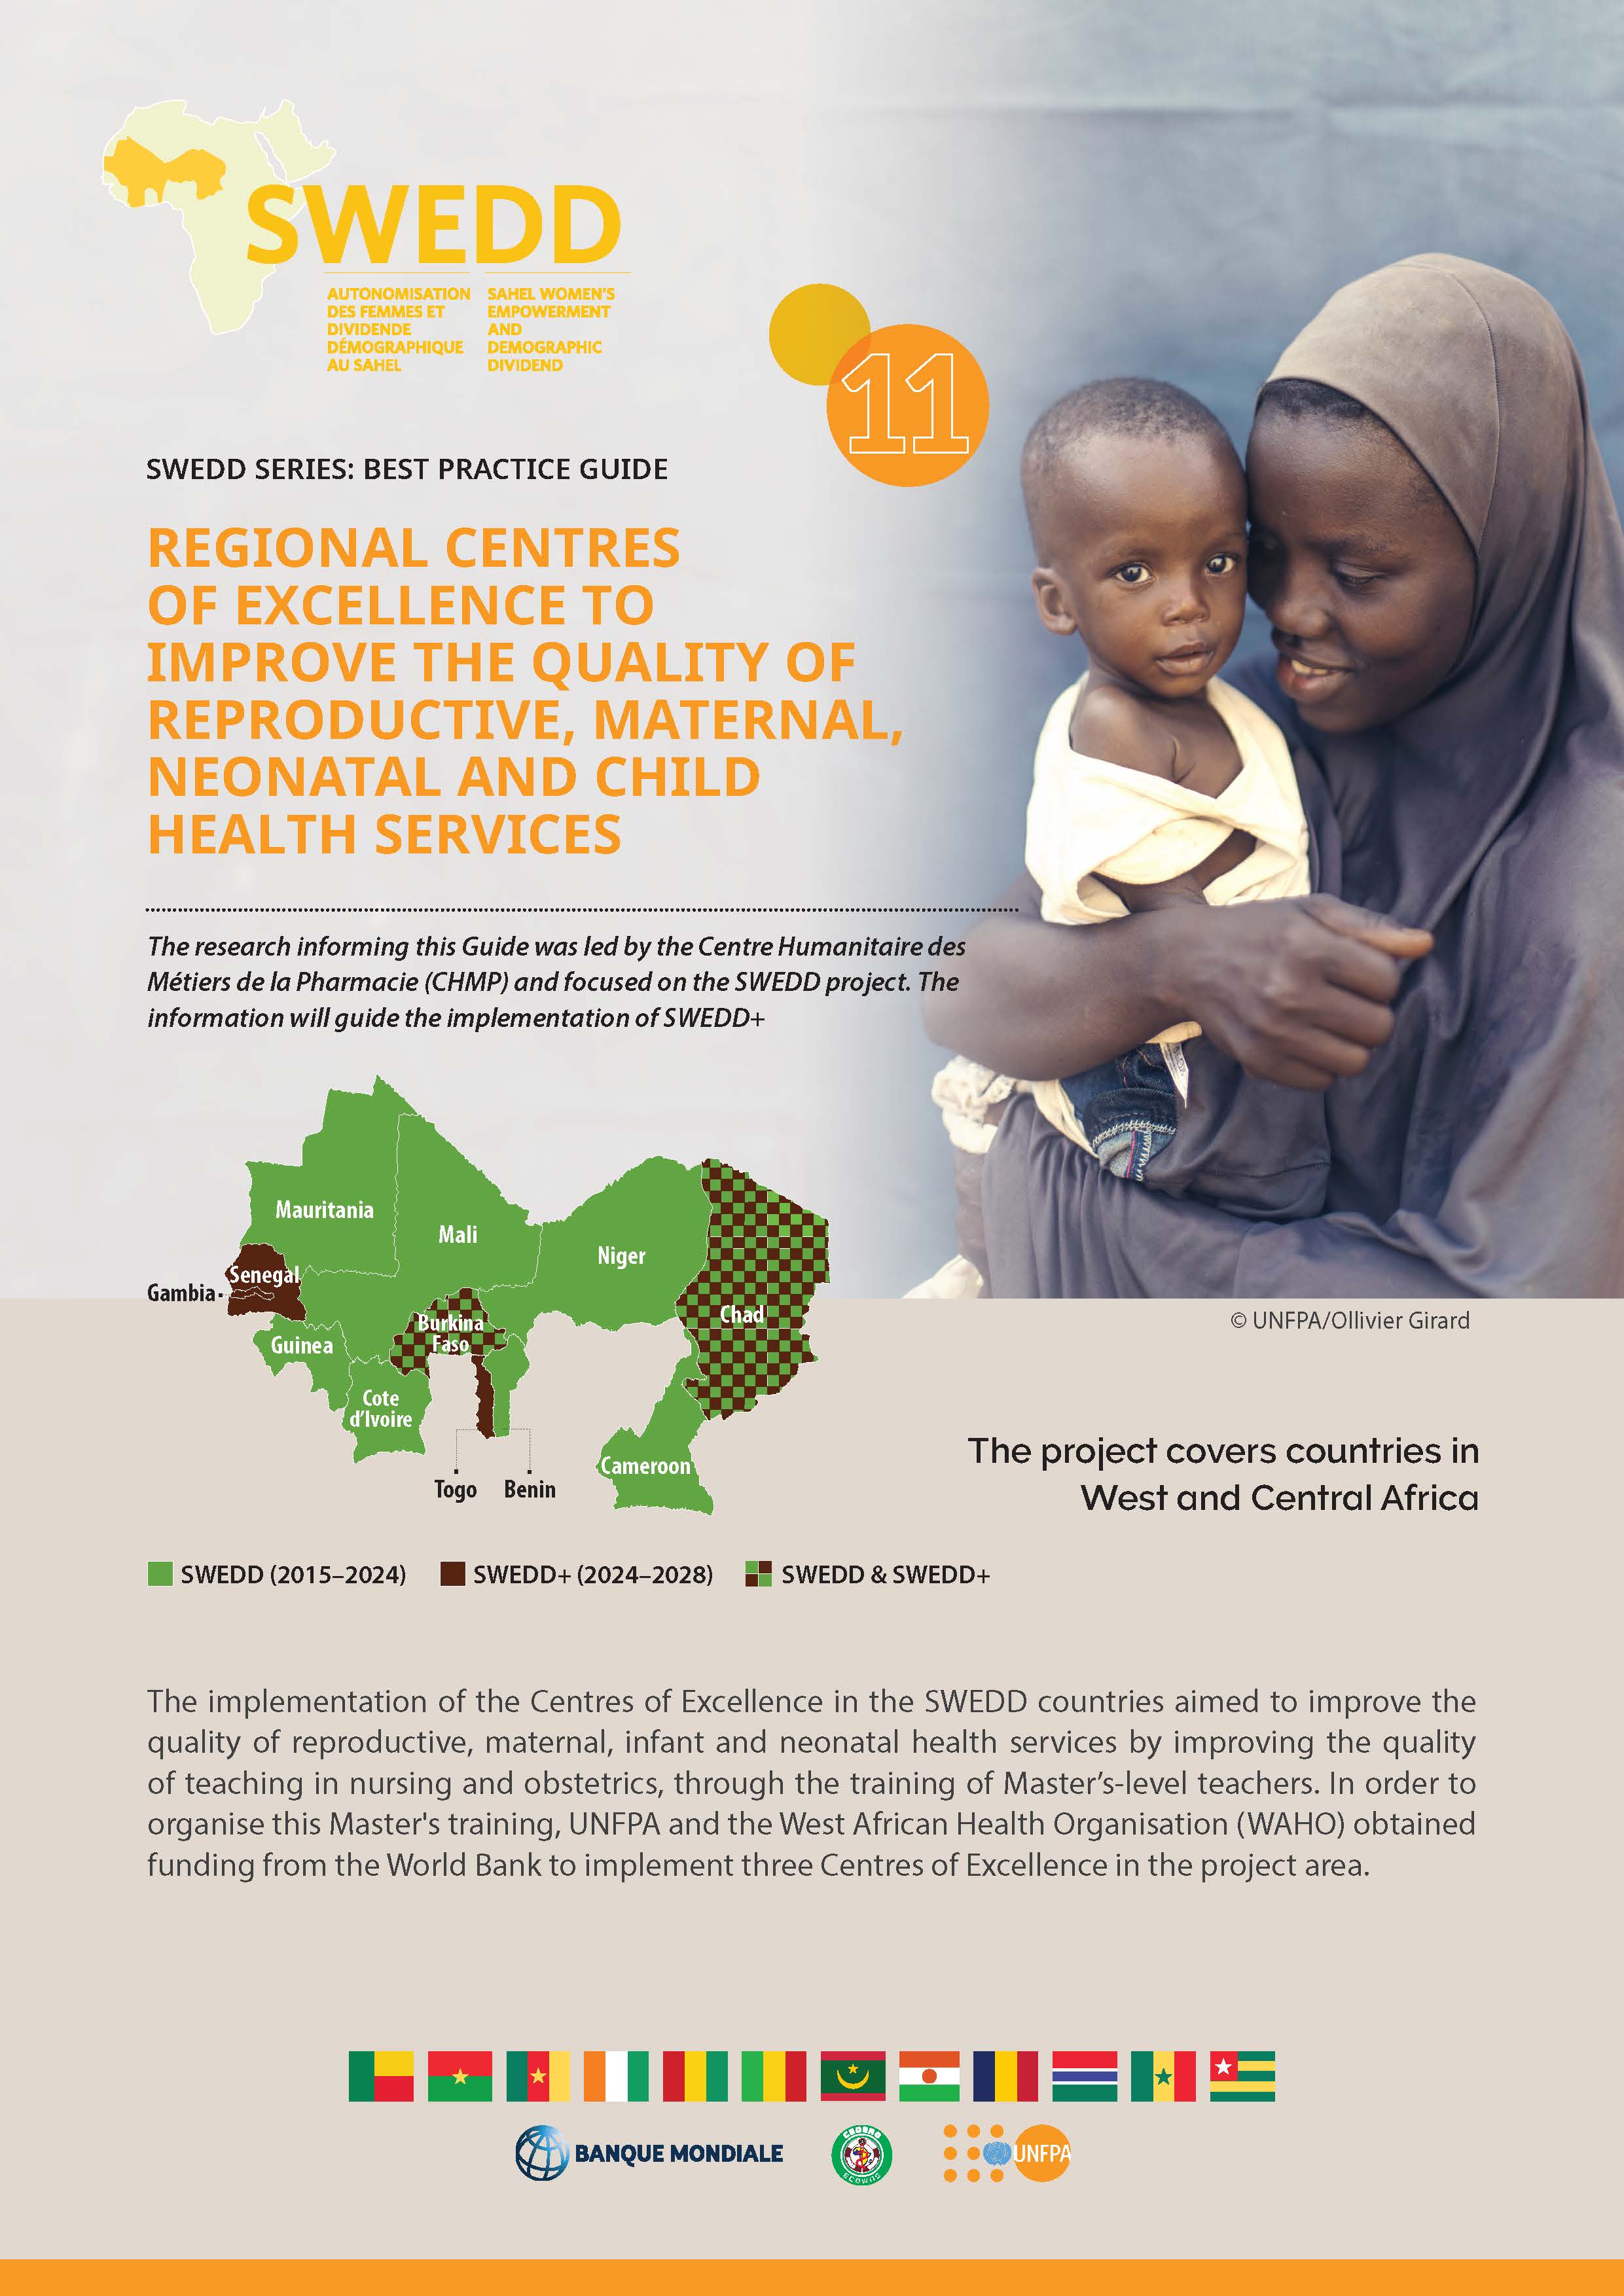 11. Regional Centres of Excellence to improve the quality of reproductive, maternal, neonatal, child and adolescent health services